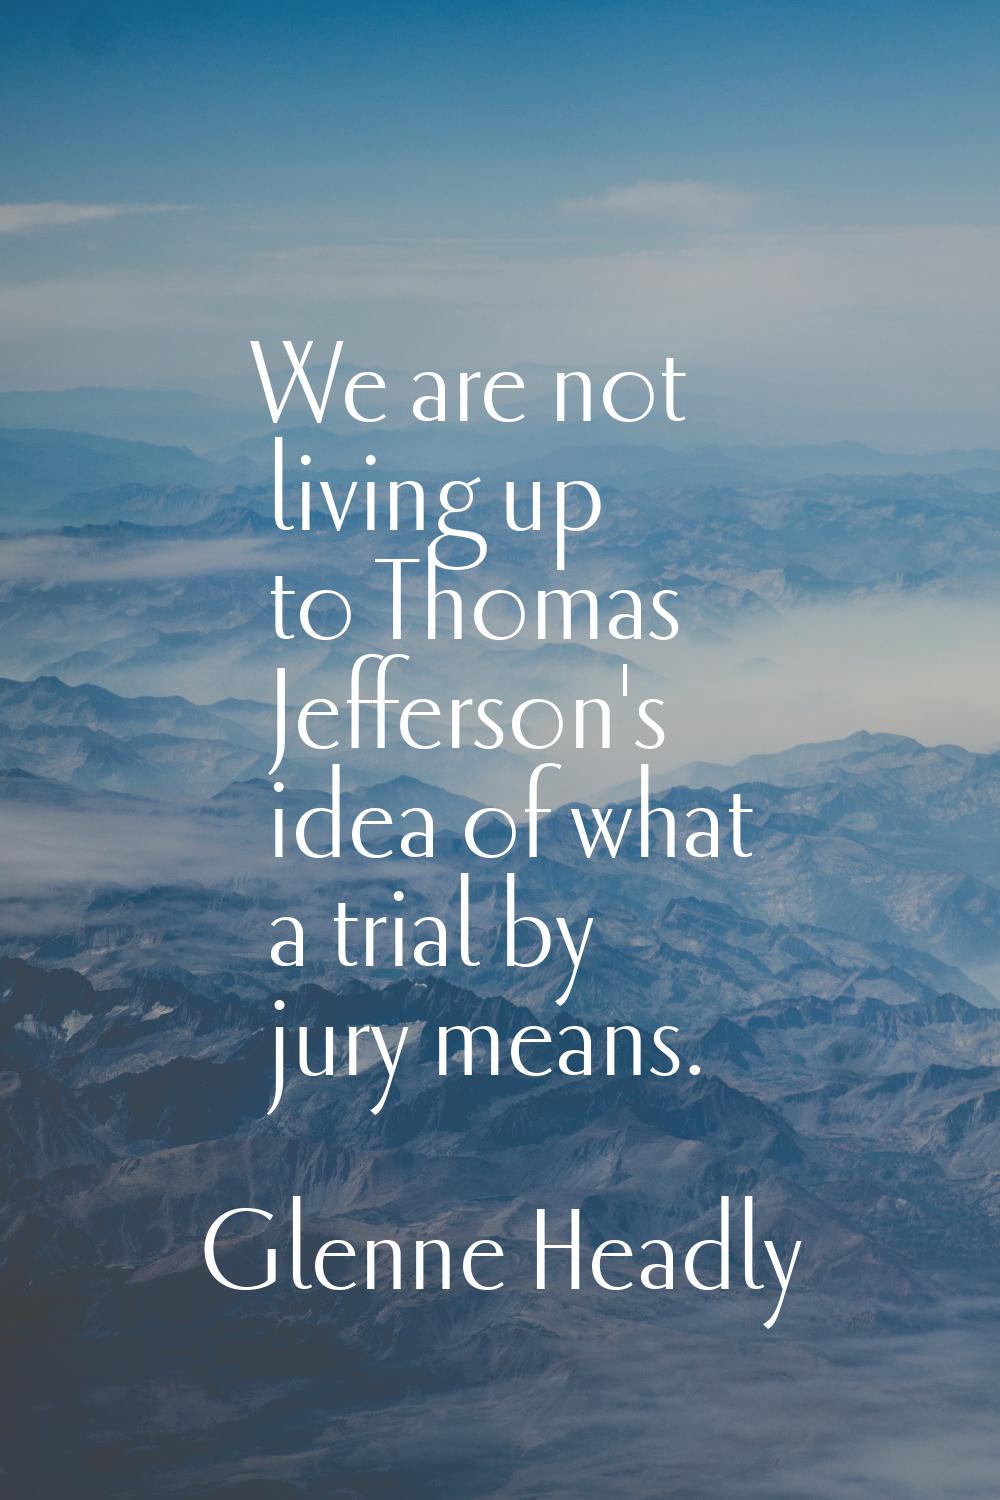 We are not living up to Thomas Jefferson's idea of what a trial by jury means.